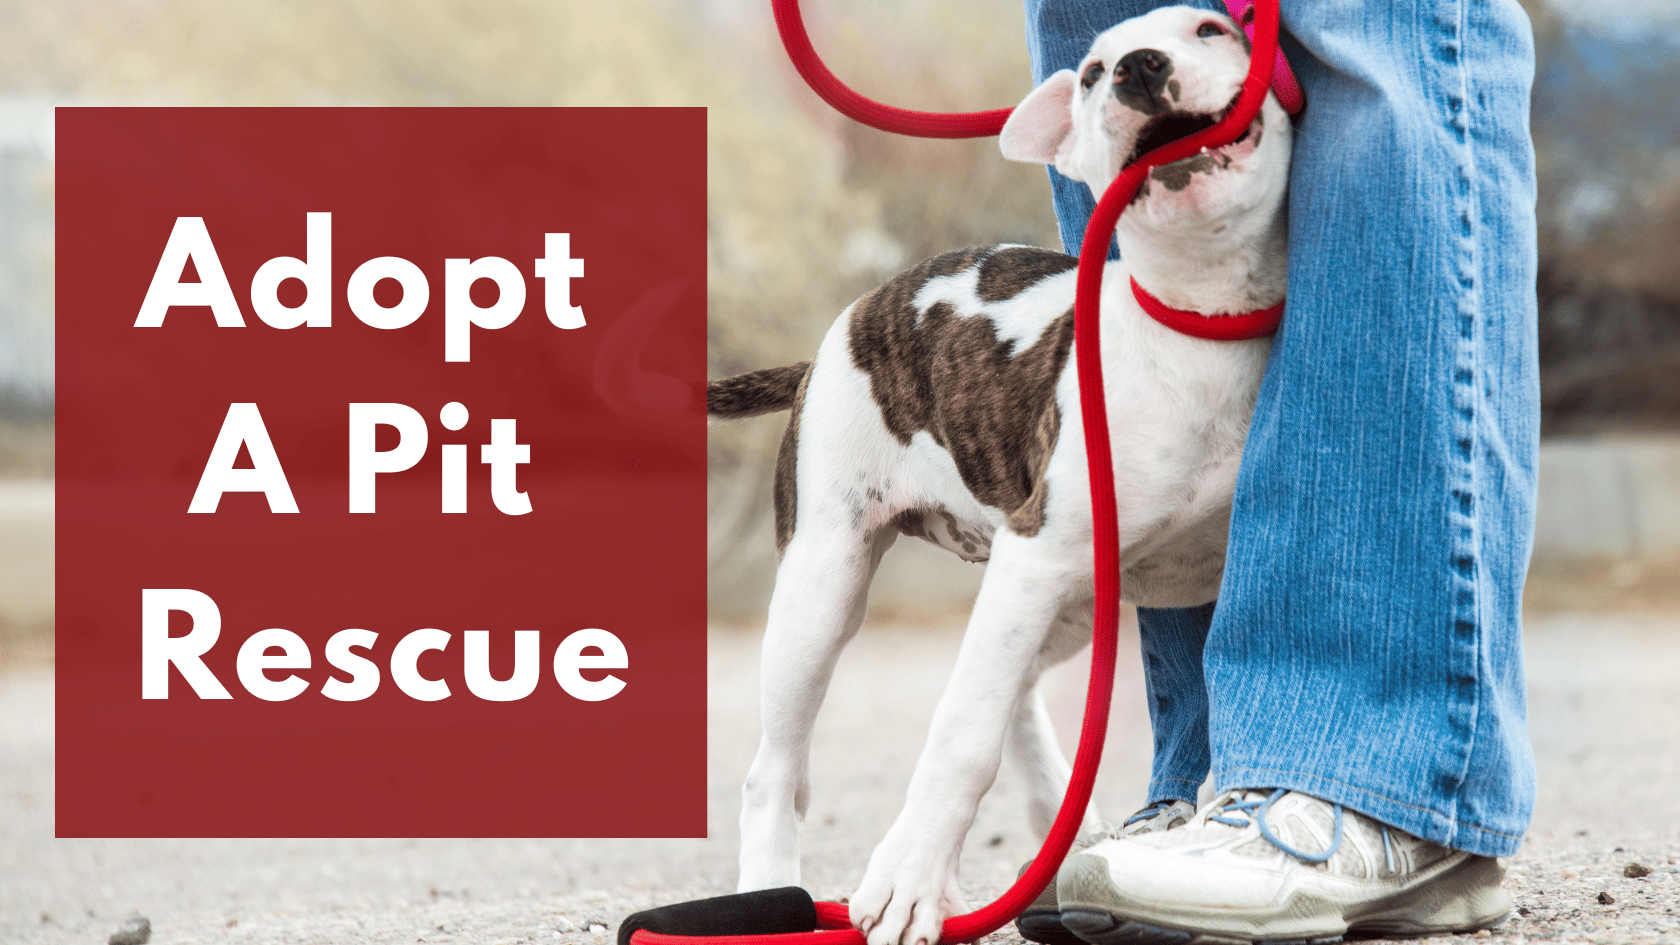 Best Ever Cause: Adopt A Pit Rescue